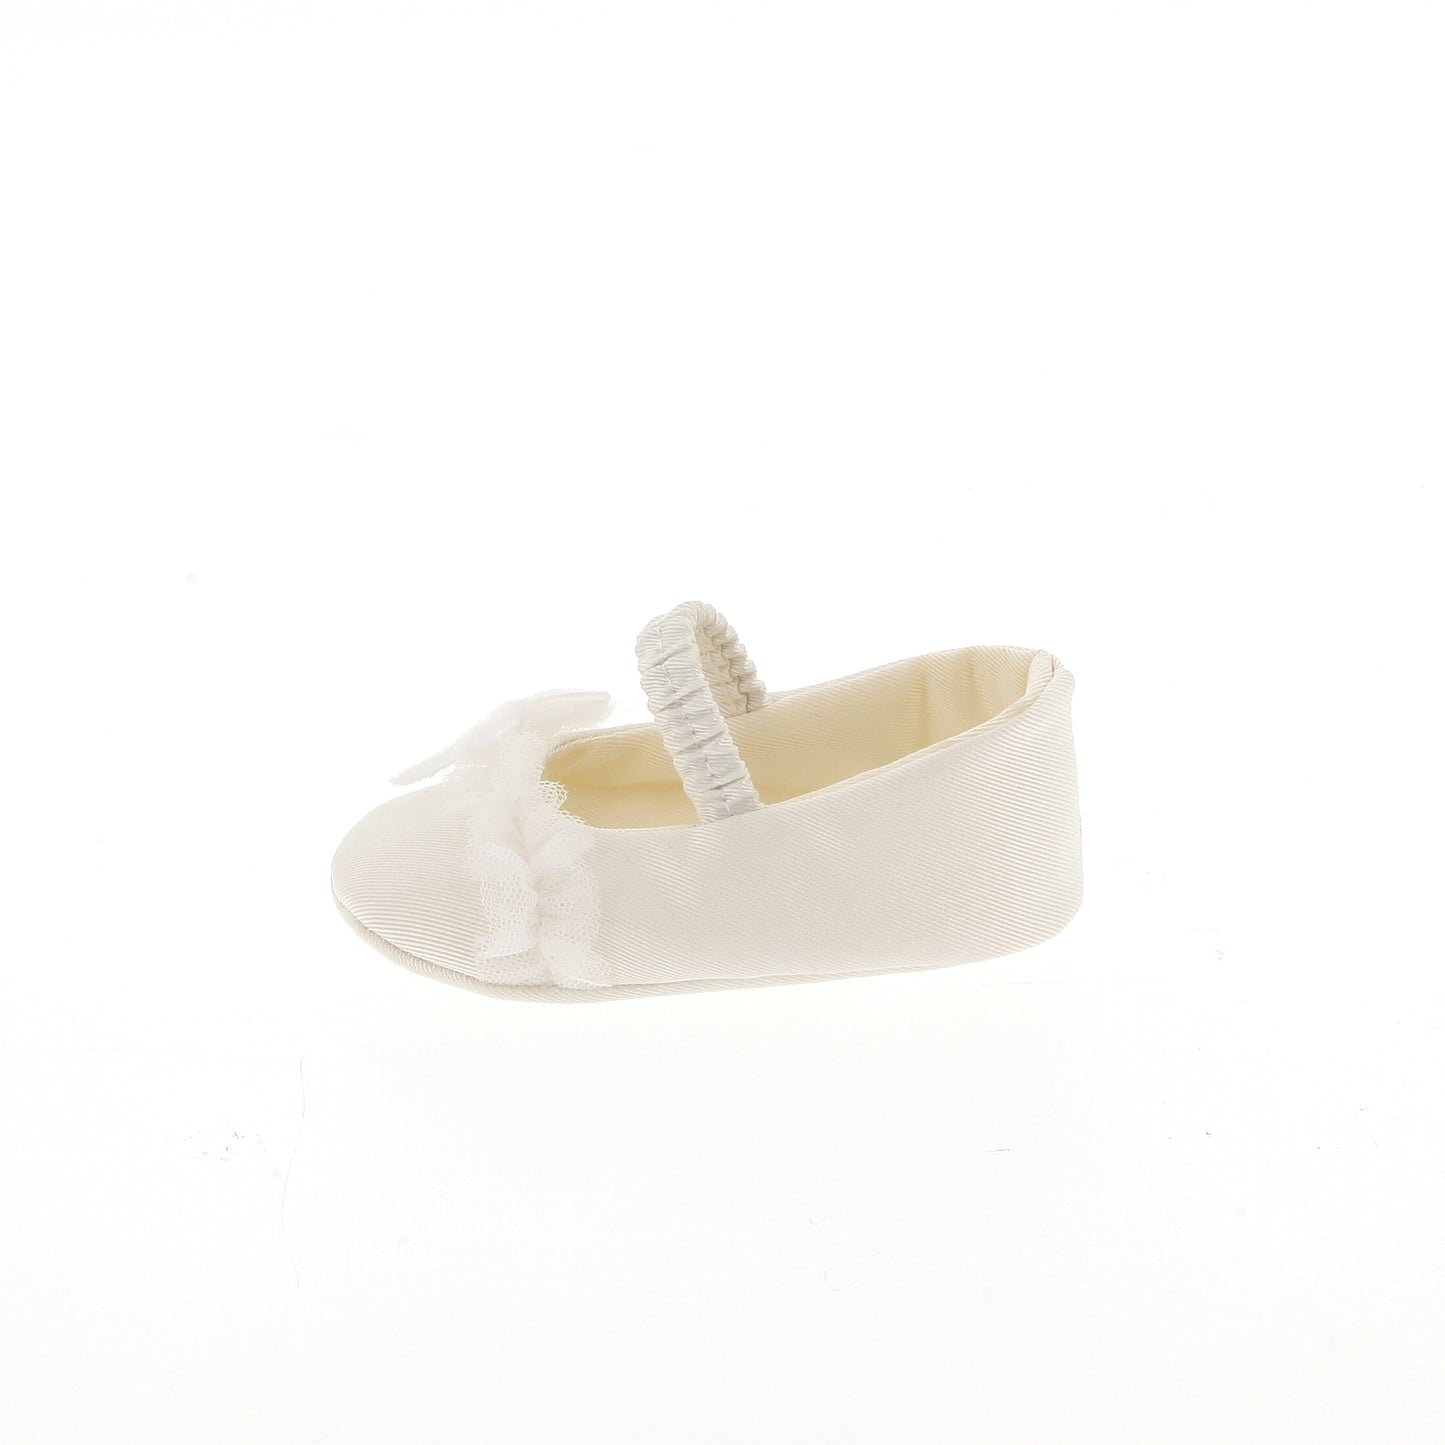 COLORICHIARI Baby shoe with tulle and cream bow A/W